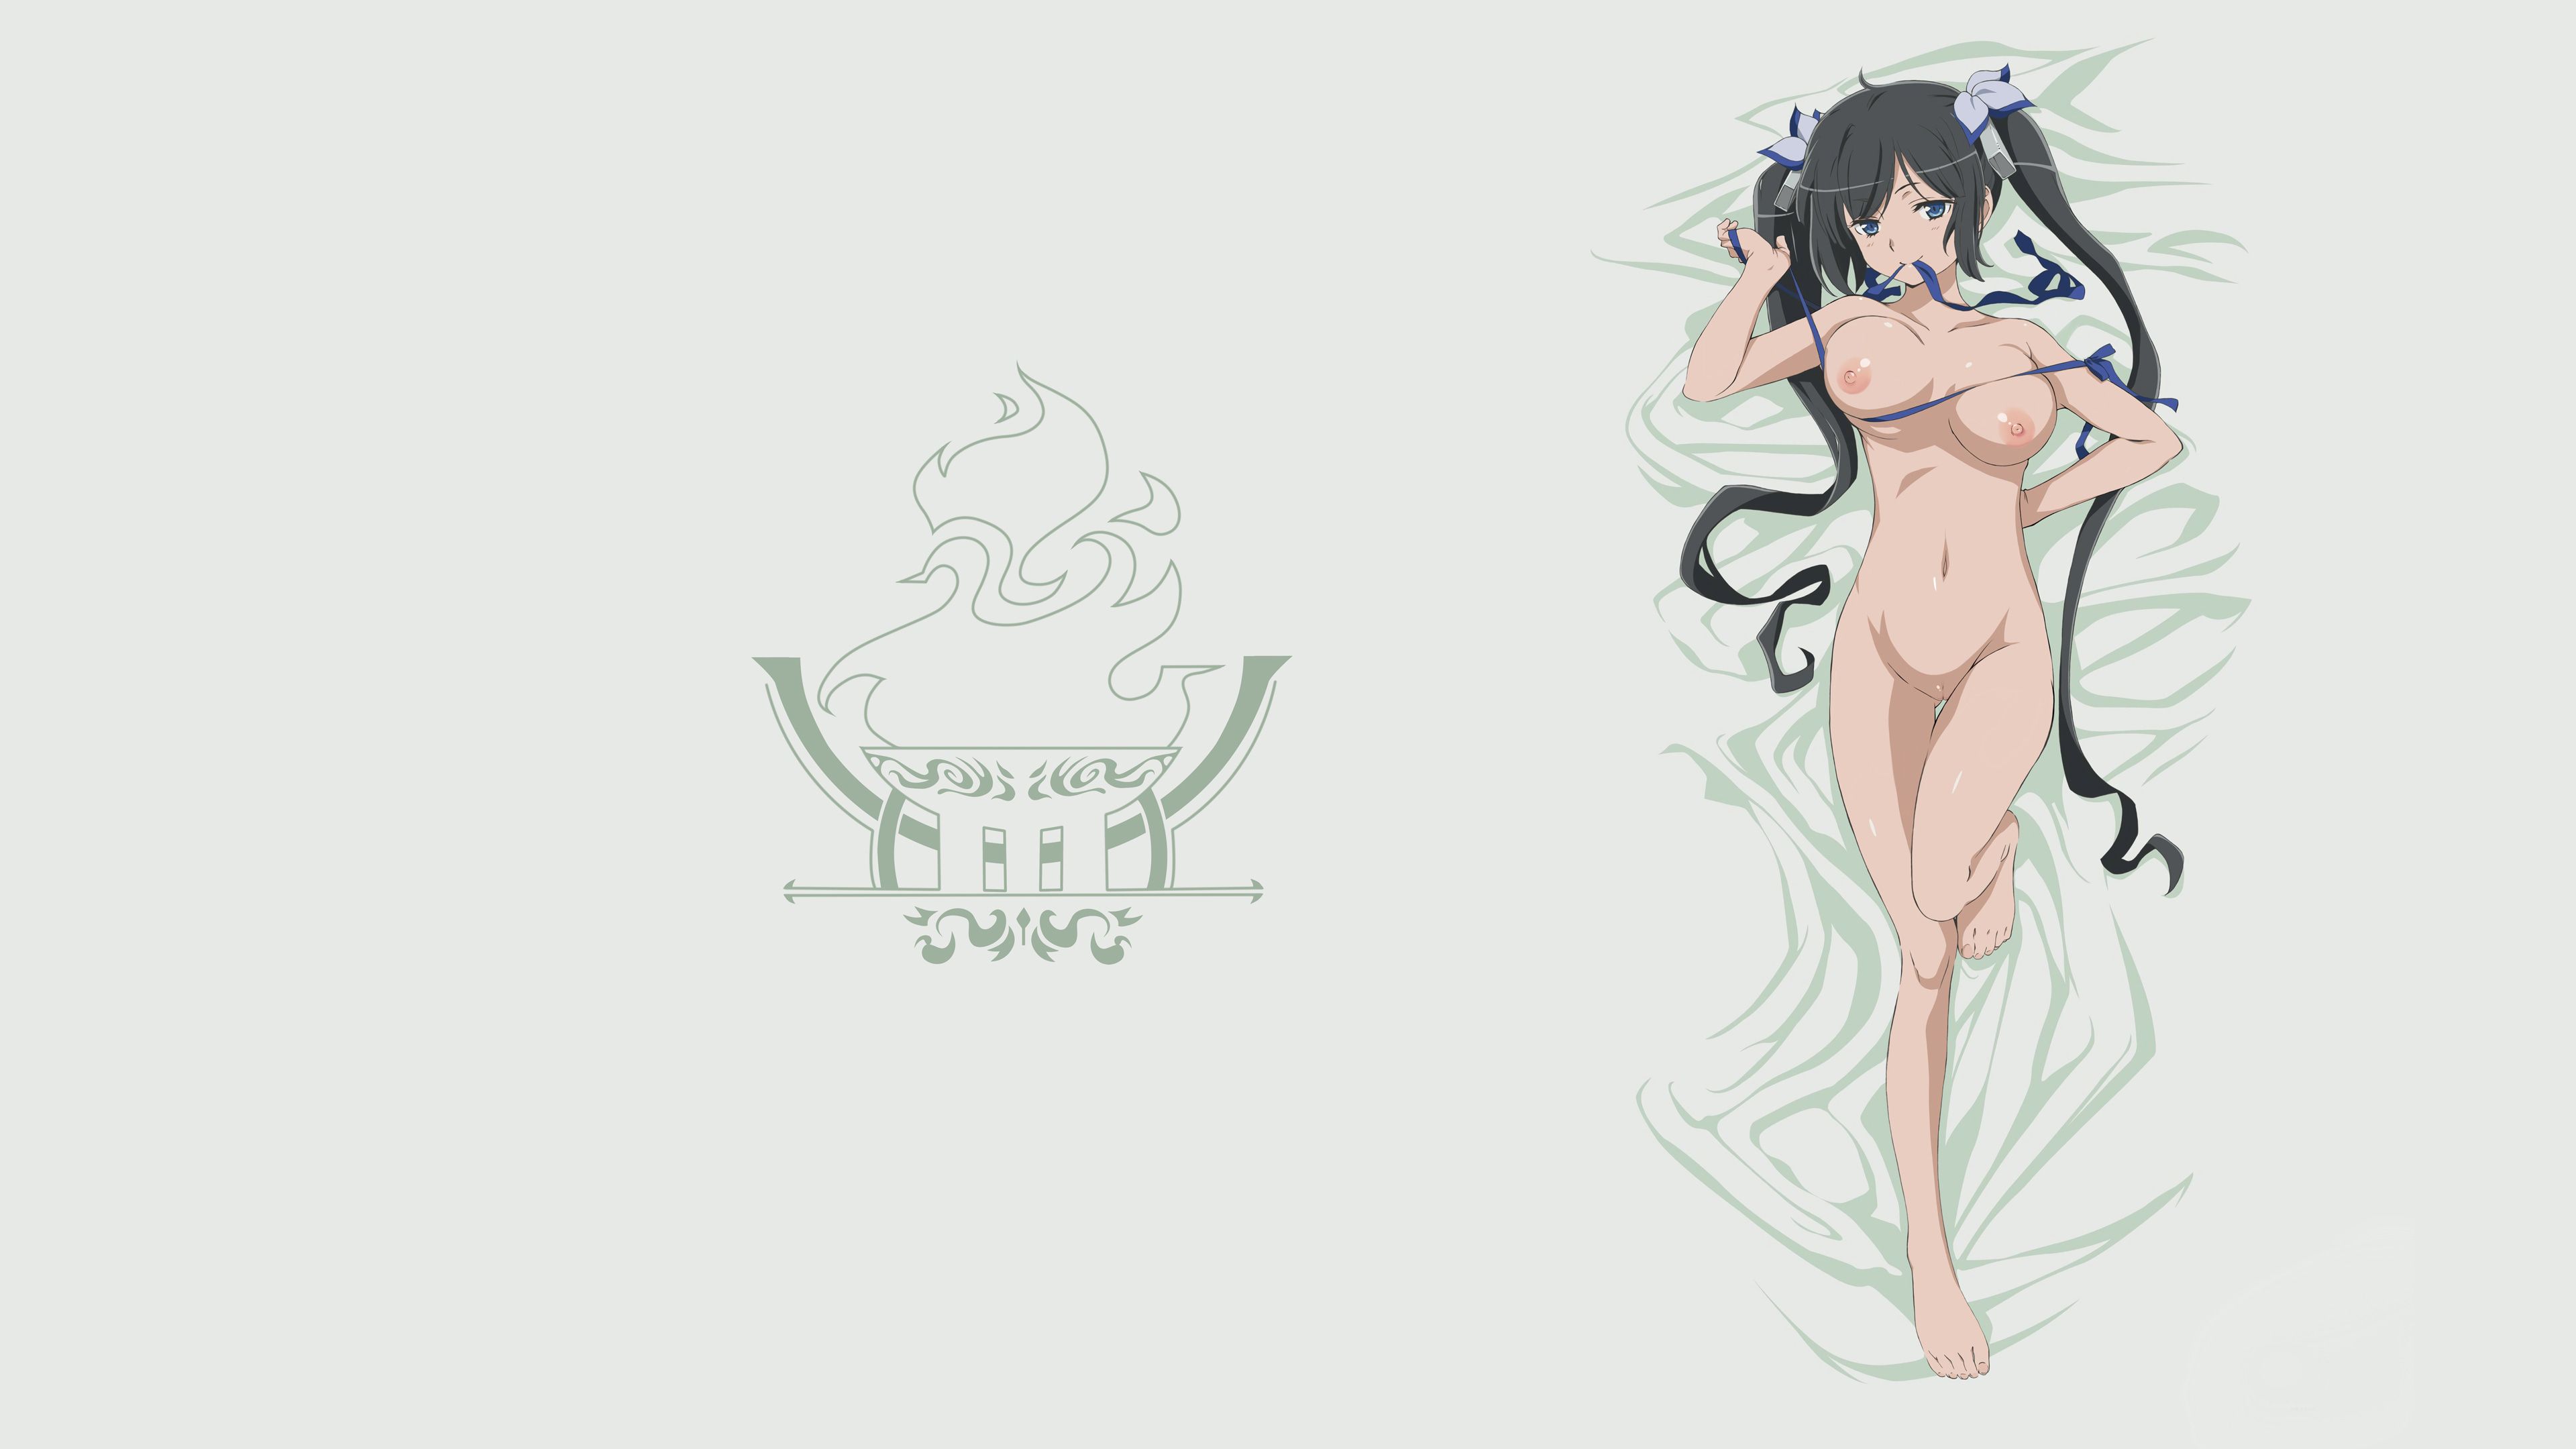 [Stripping Cora] drop a large amount of stripped cora image, such as anime official picture Part 269 3